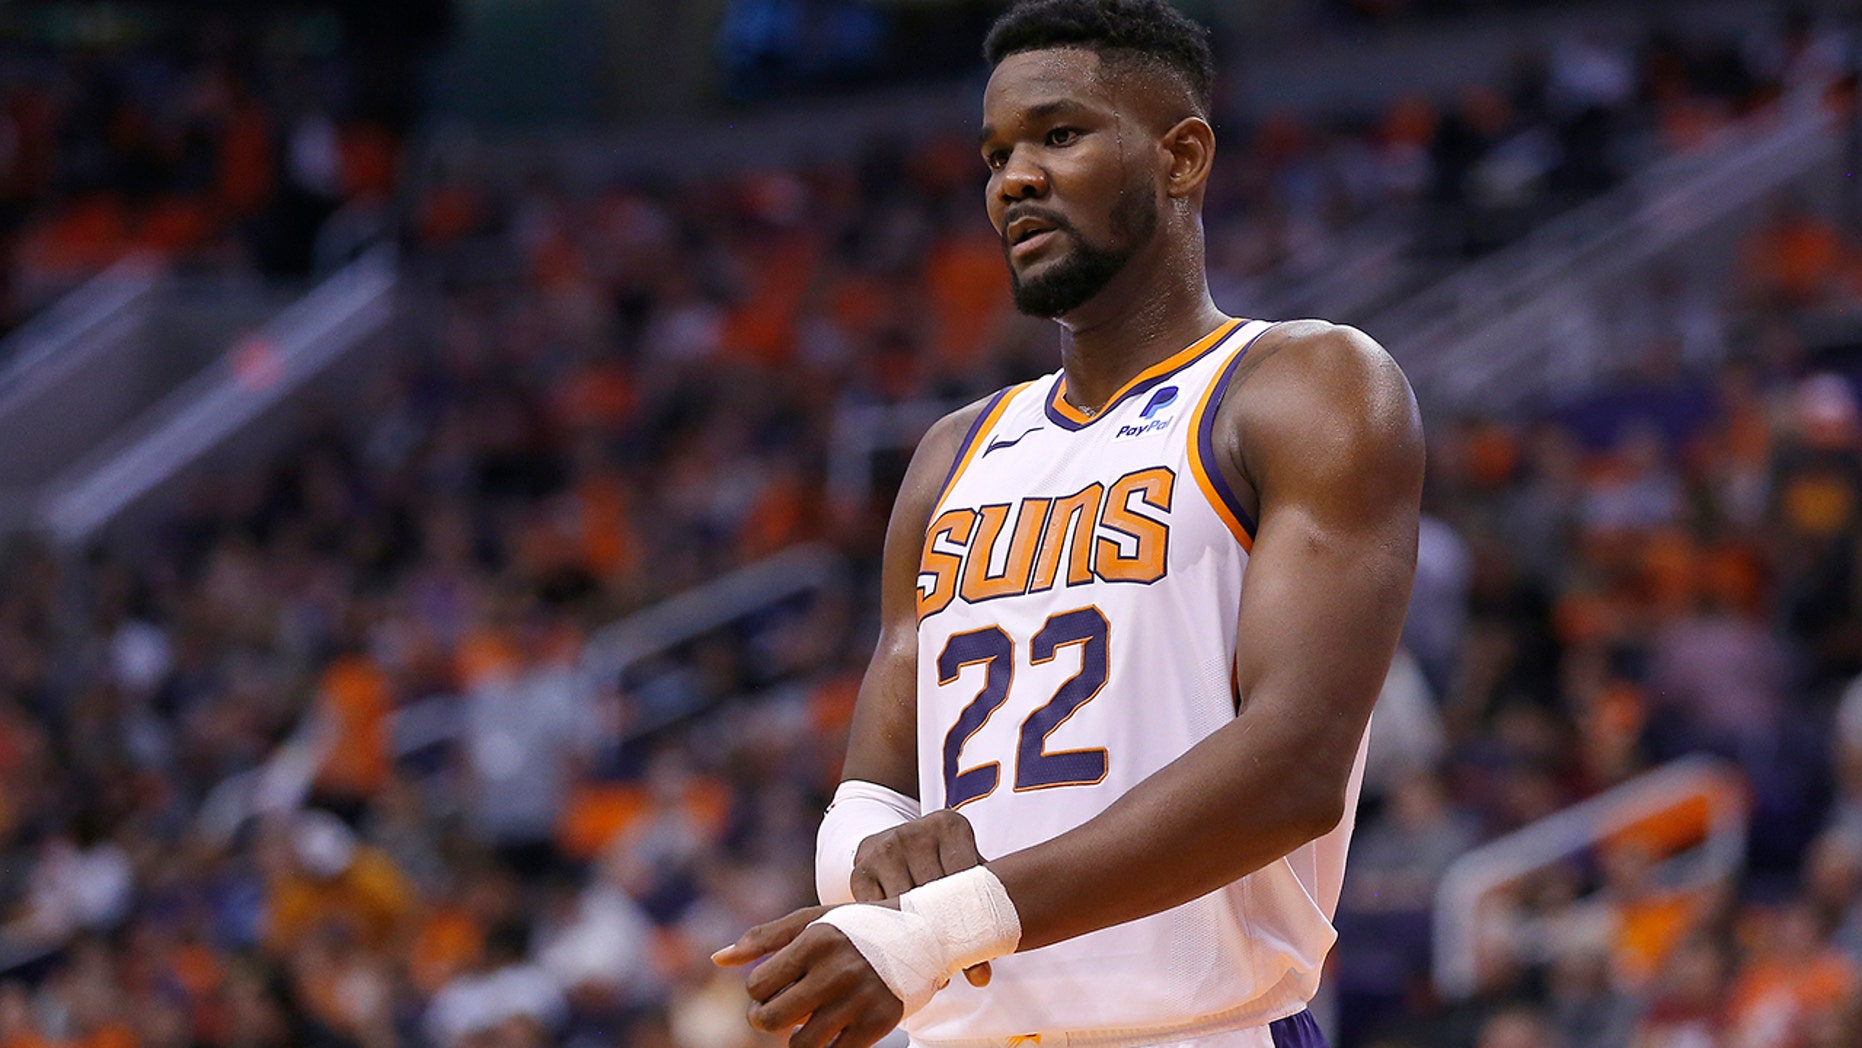 FILE - In this Oct. 23, 2019 file photo Phoenix Suns center Deandre Ayton (22) in the first half during an NBA basketball game against the Sacramento Kings in Phoenix. Ayton returns to the Suns on Tuesday, Dec. 17, 2019 against the Los Angeles Clippers after missing the season's first 25 games for violating the NBA's drug policy. (AP Photo/Rick Scuteri)